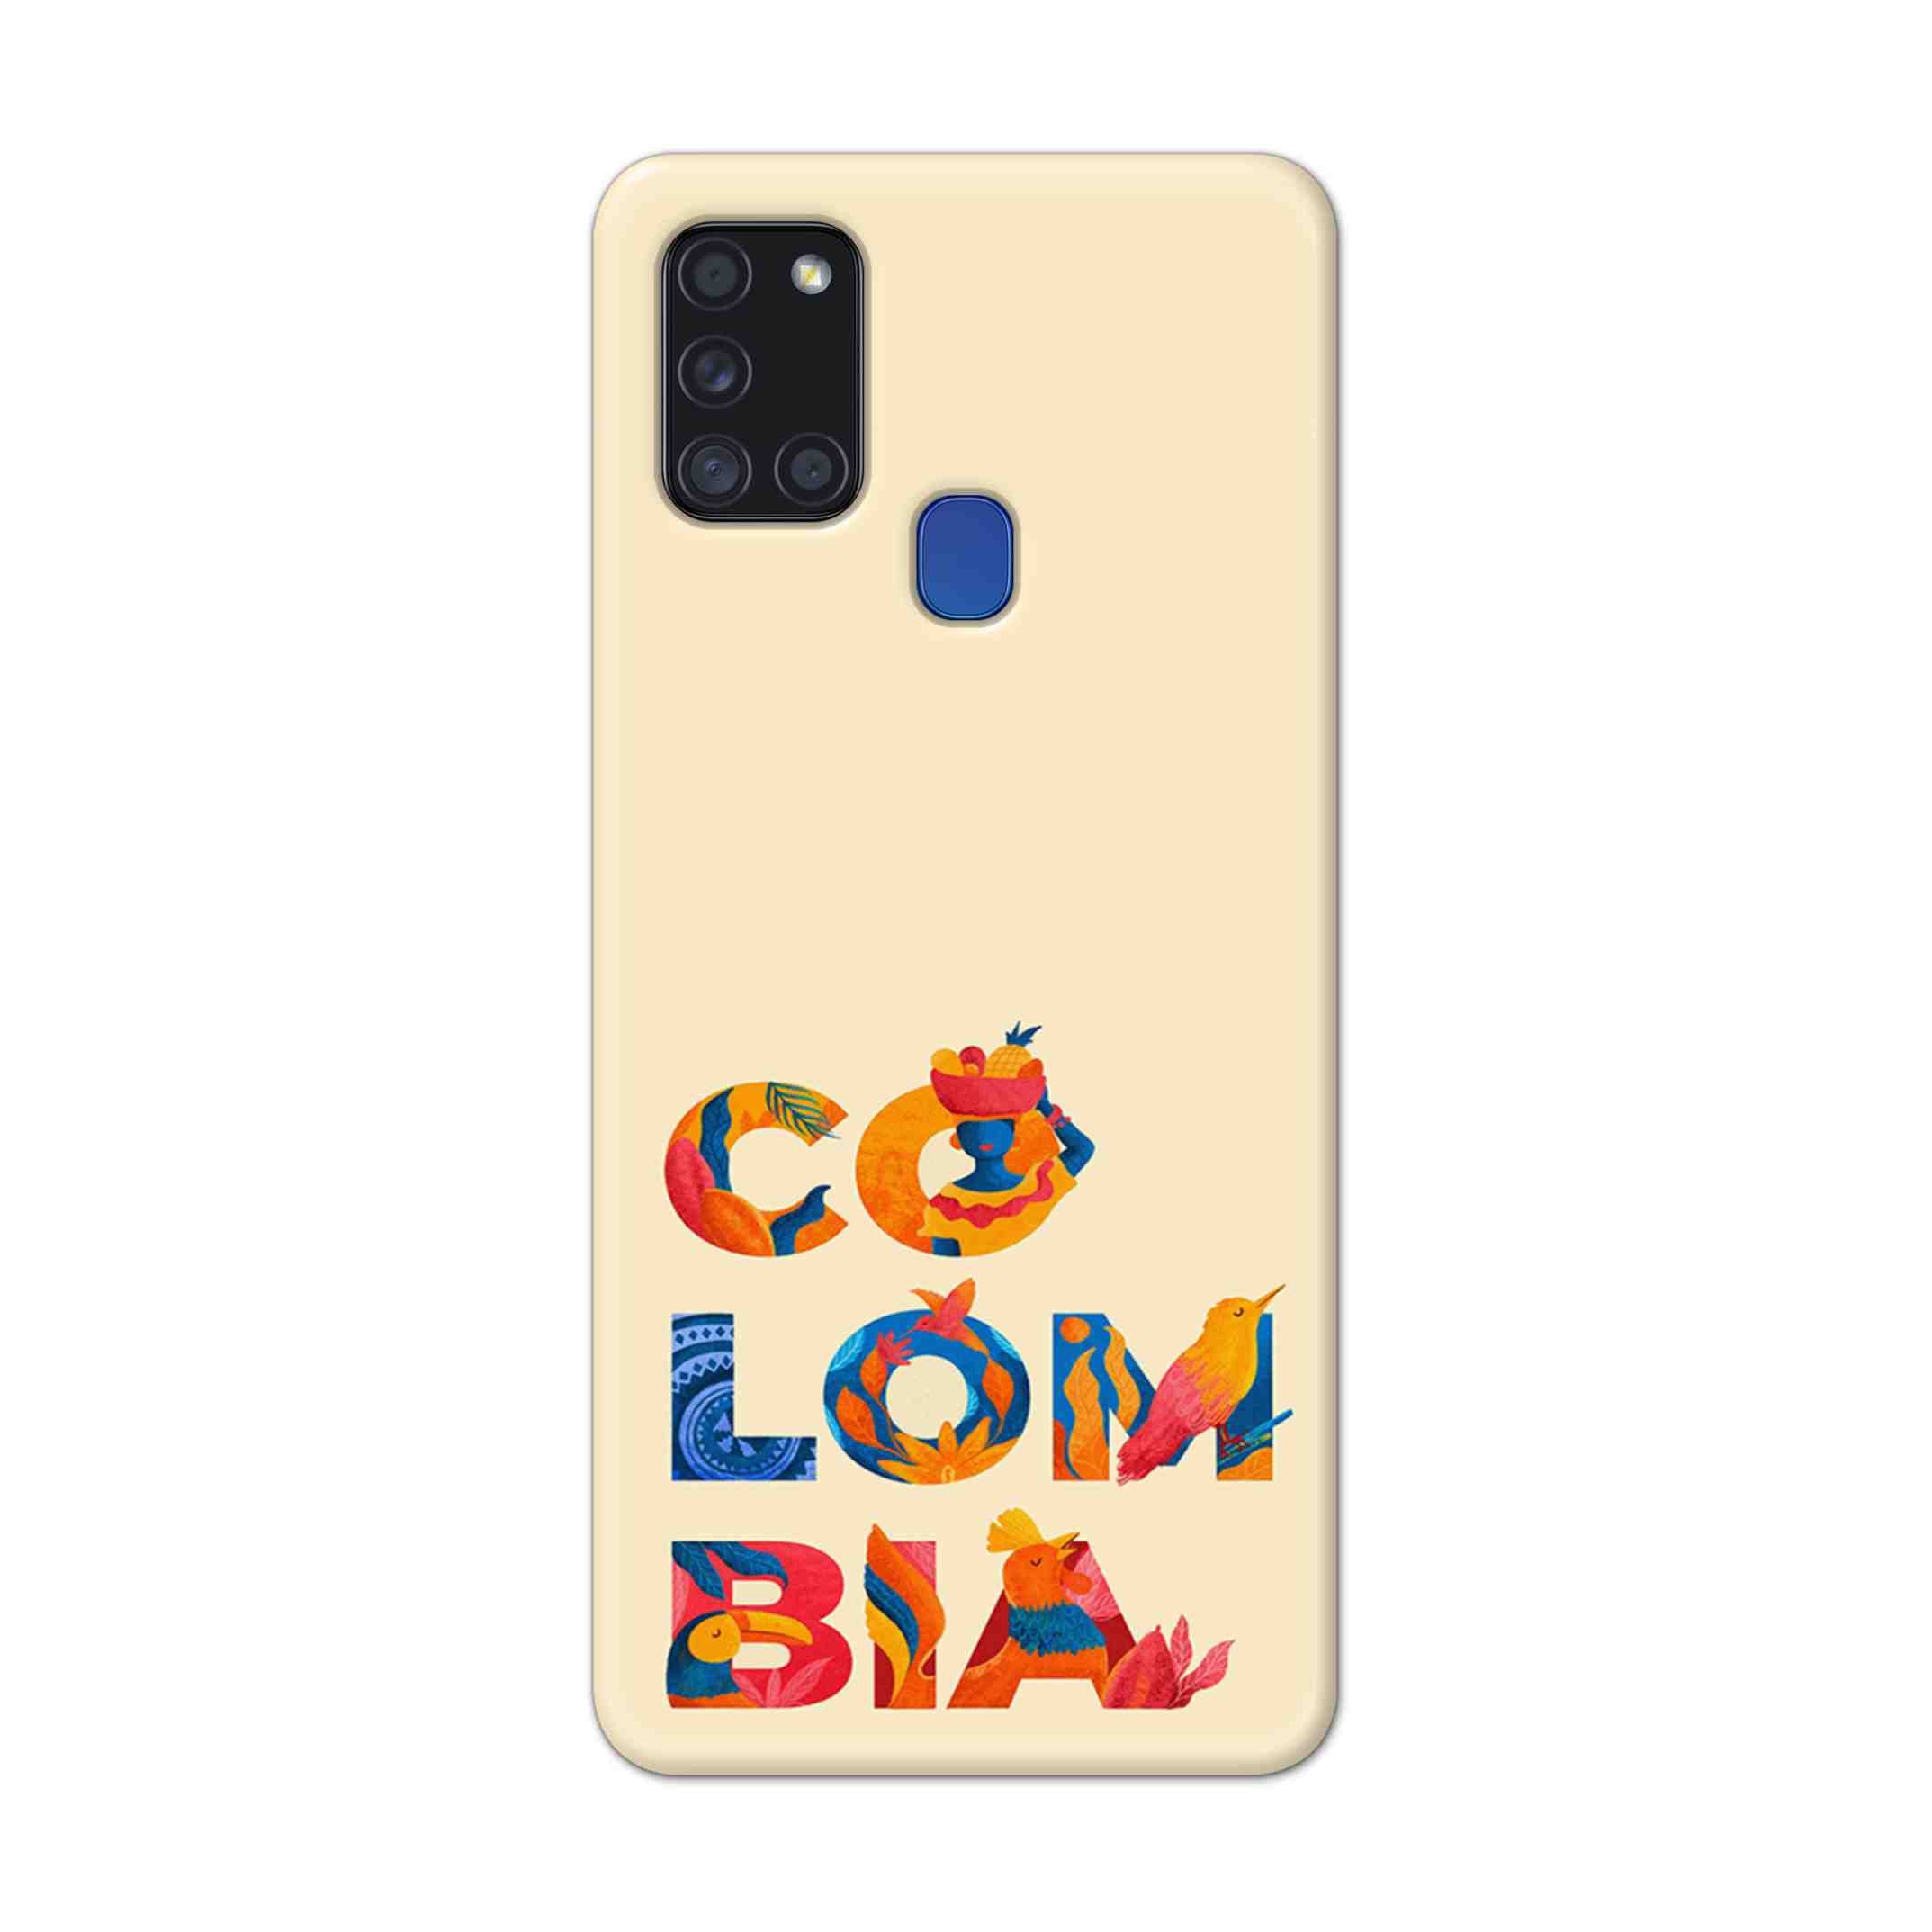 Buy Colombia Hard Back Mobile Phone Case Cover For Samsung Galaxy A21s Online